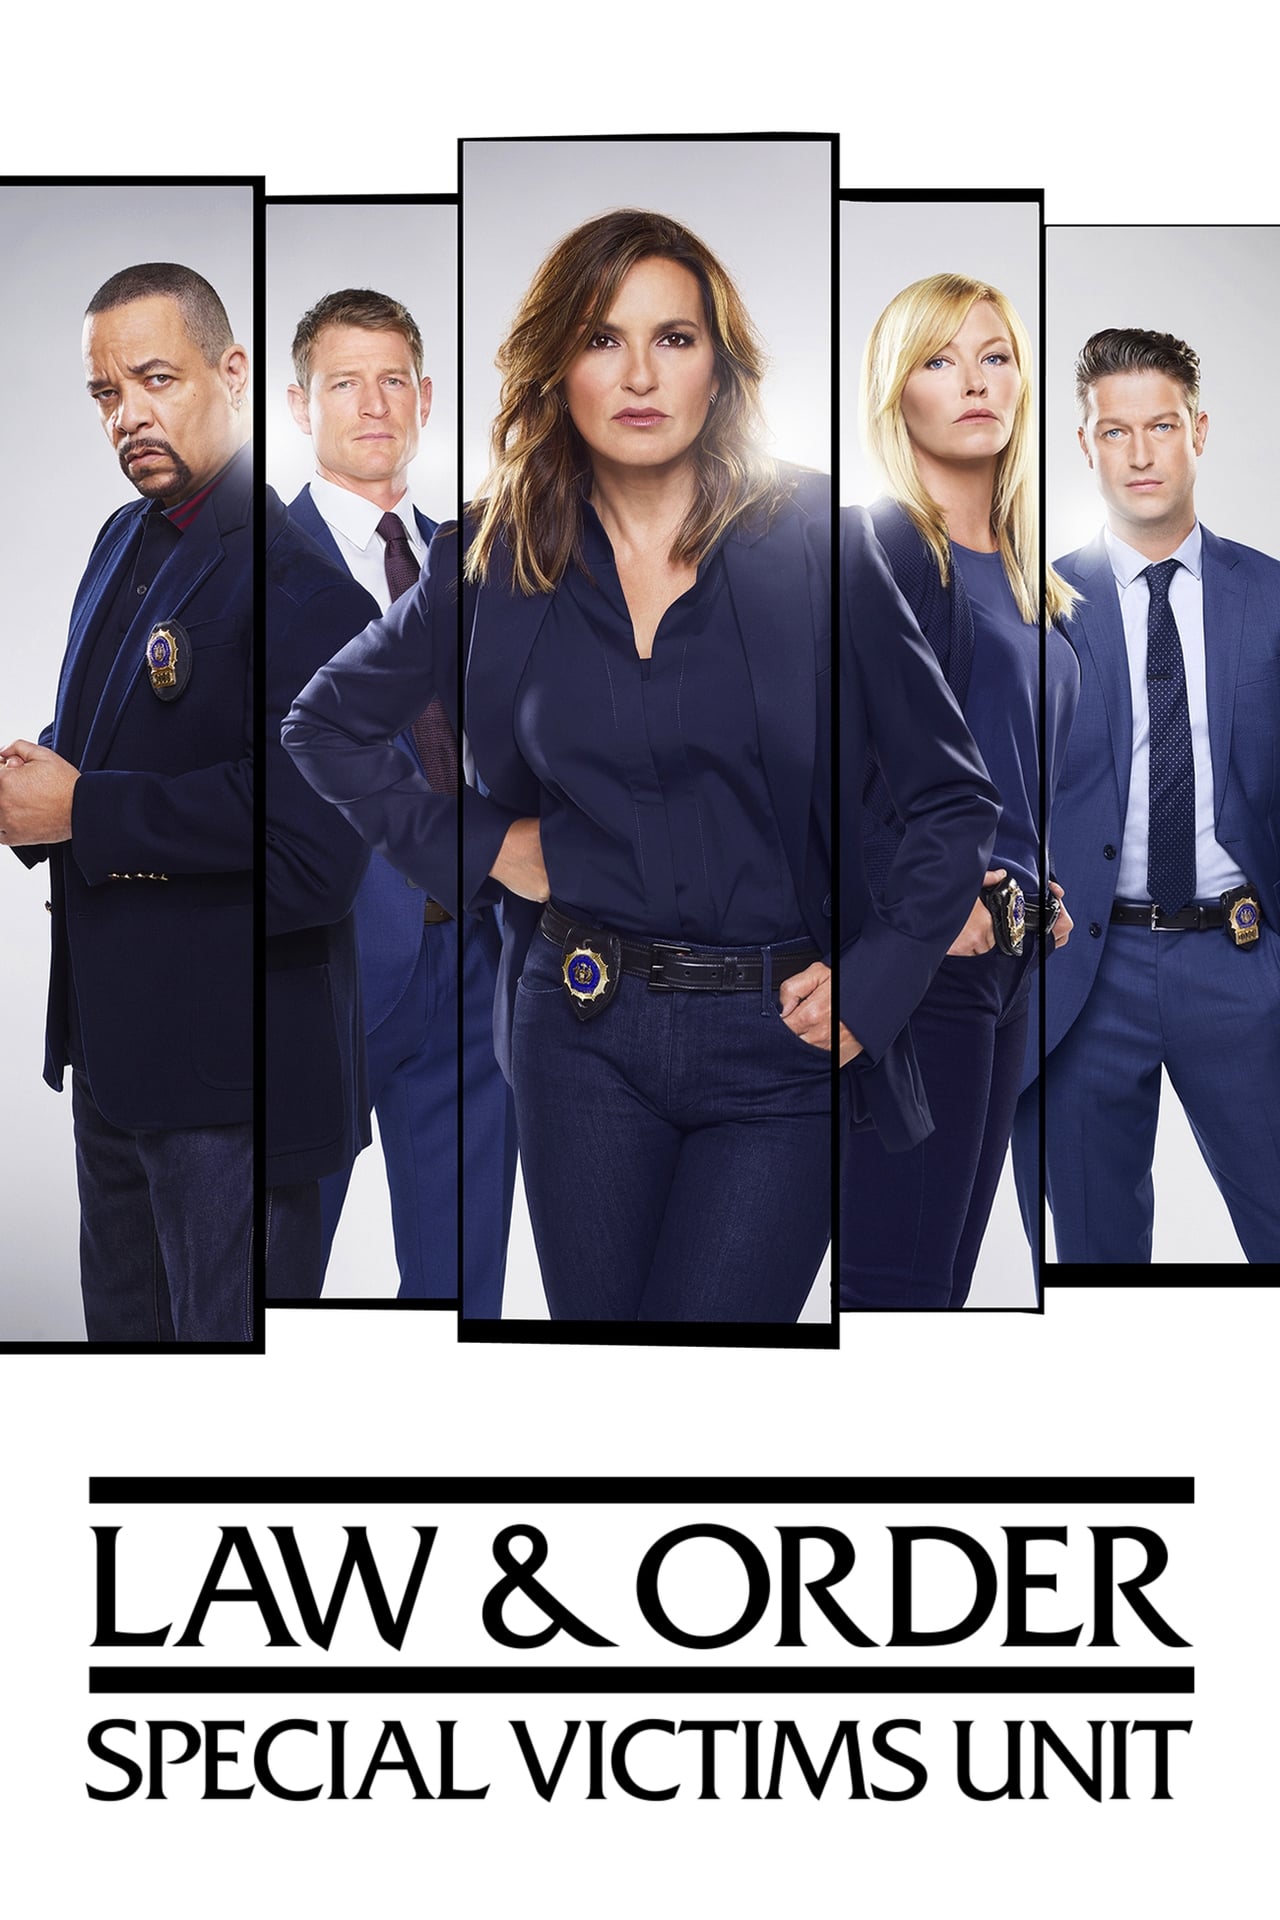 Law & Order: Special Victims Unit (1970)